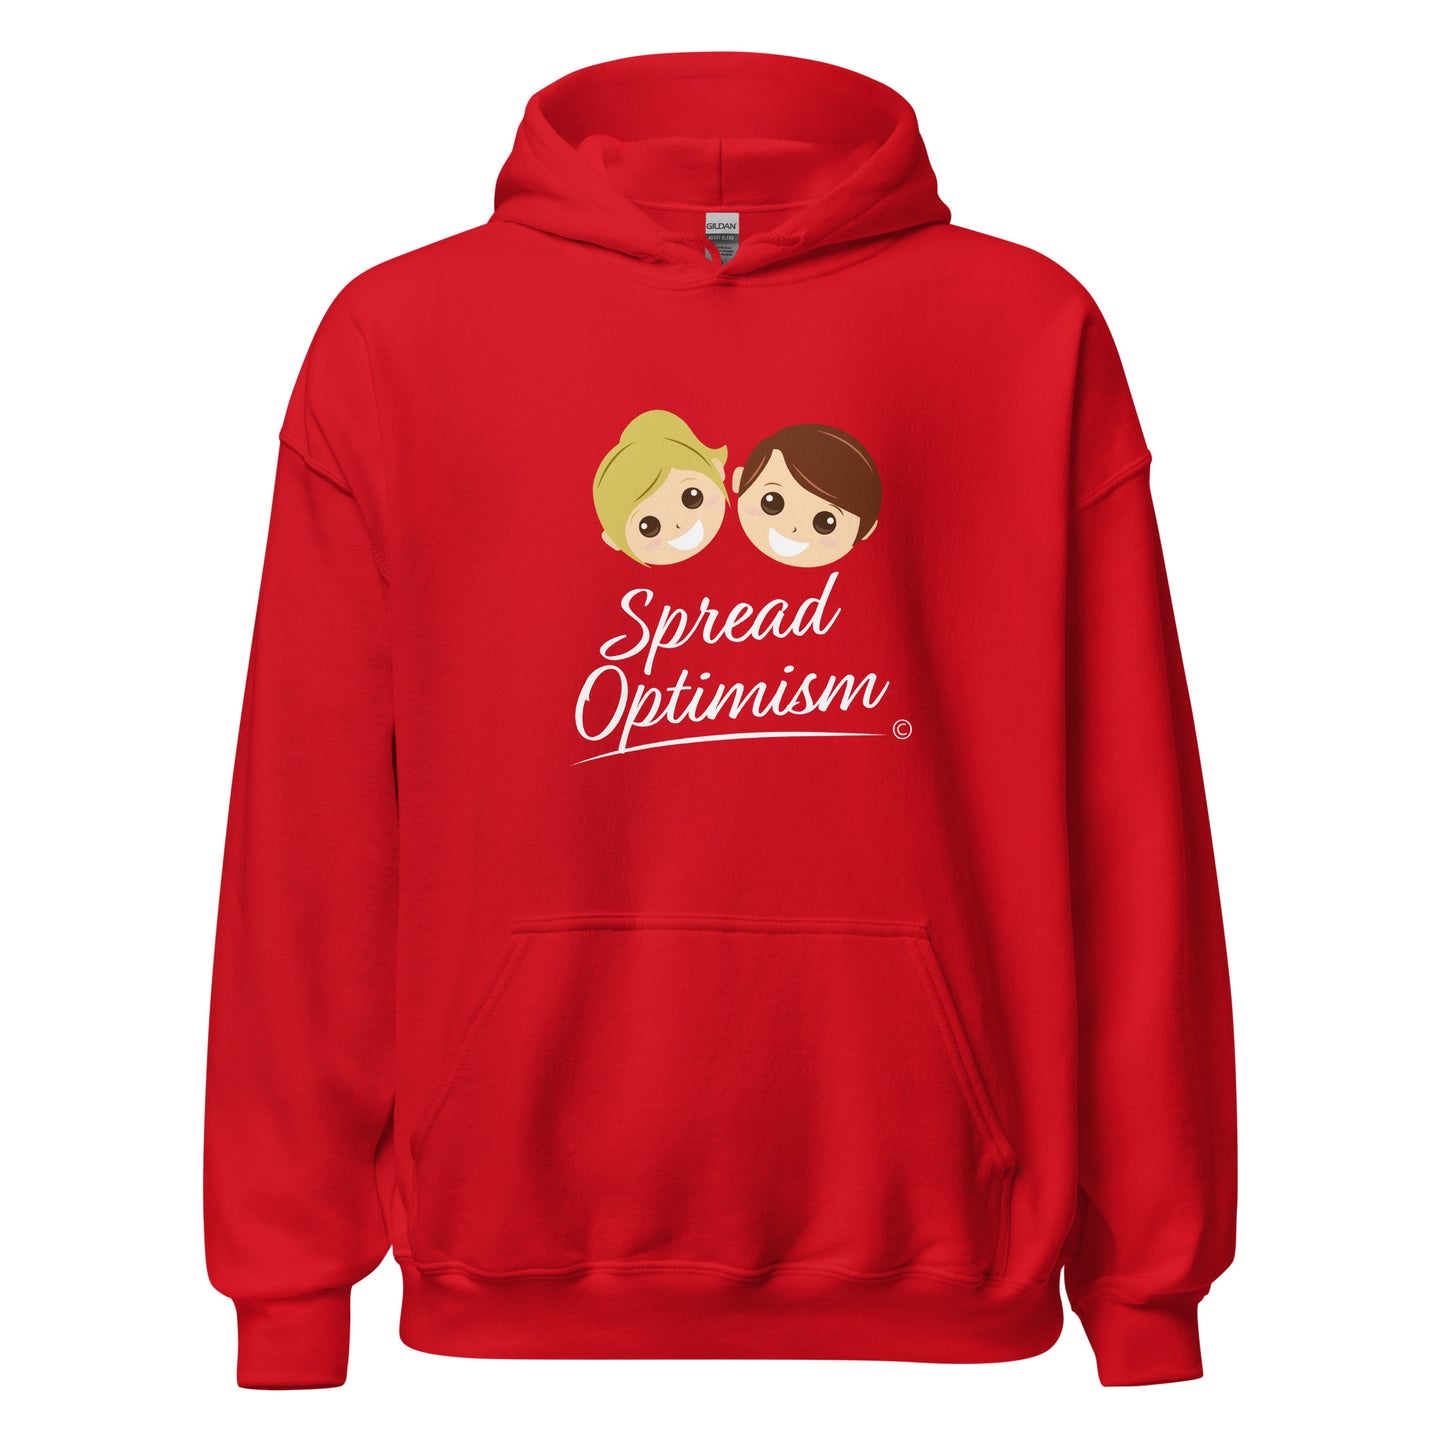 Outdoor unisex hoodies for him and her- Red